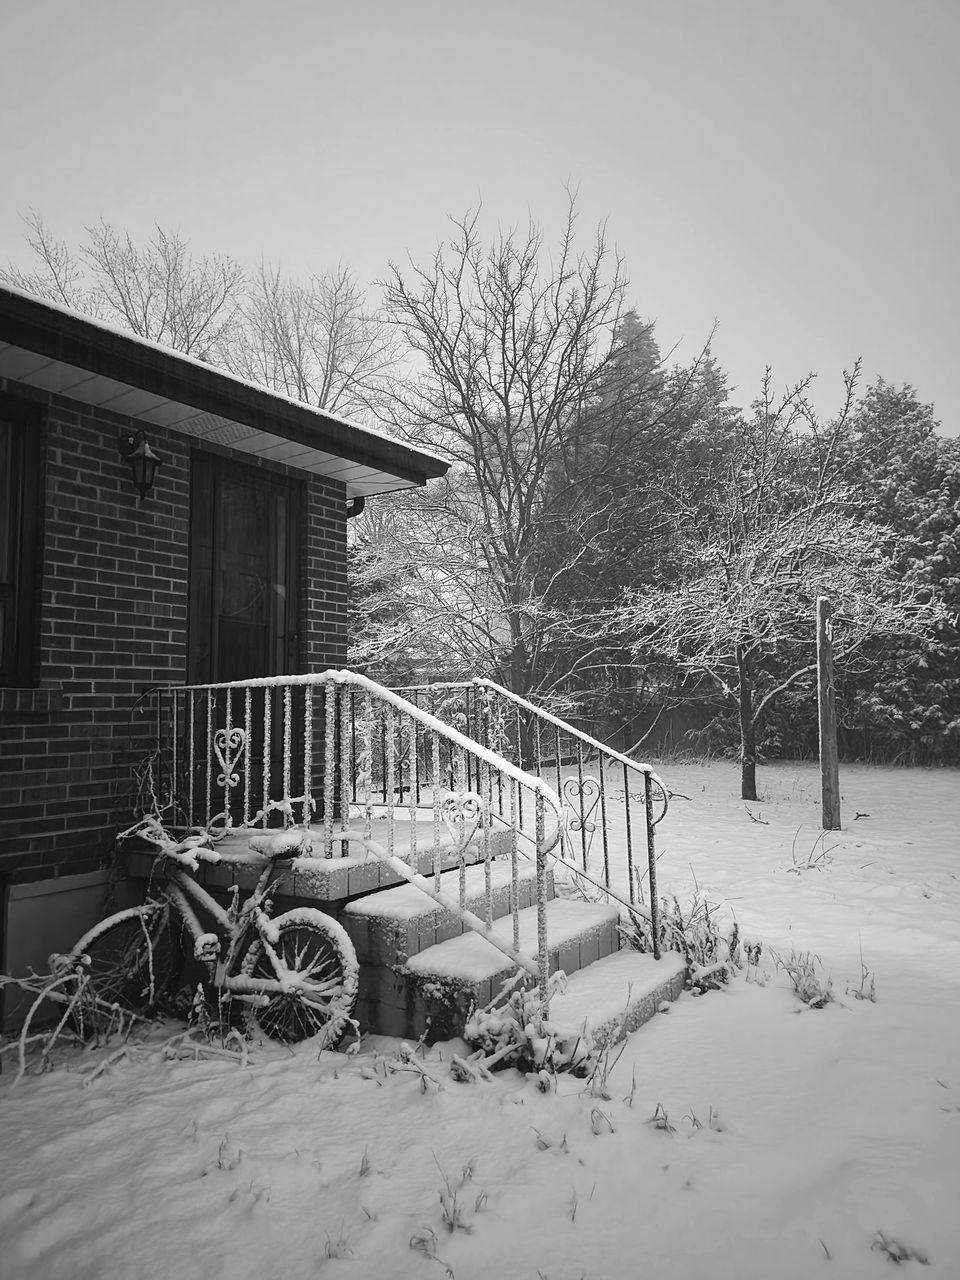 snow, winter, architecture, tree, built structure, nature, bicycle, building exterior, plant, cold temperature, white, no people, monochrome, house, black and white, wheel, bare tree, building, sky, day, monochrome photography, outdoors, home, transportation, vehicle, land vehicle, tire